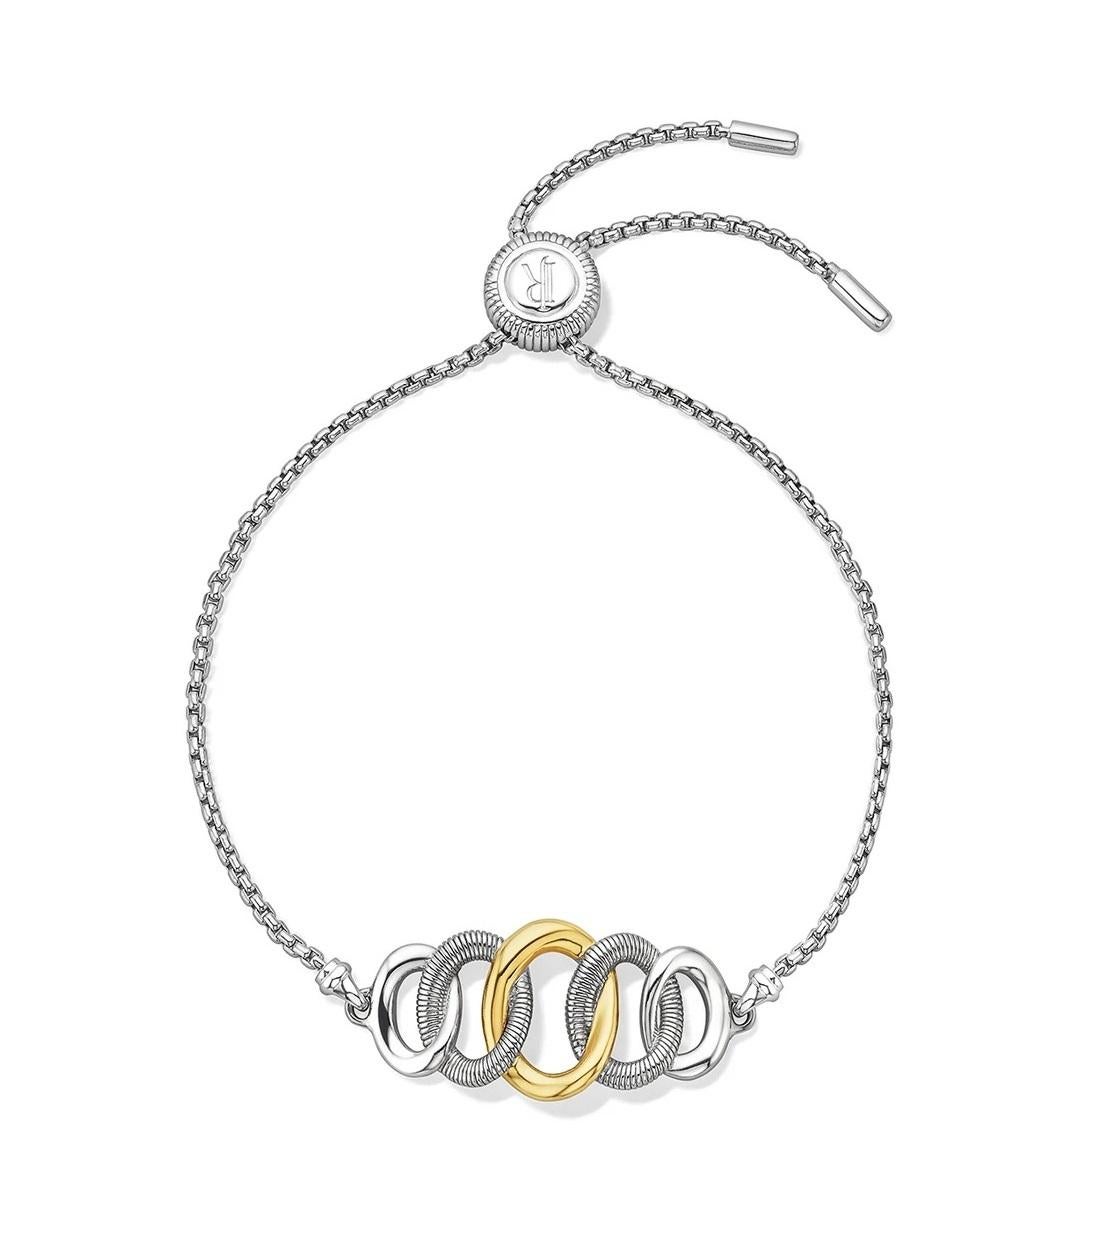 Our Eternity Friendship Bracelet explores a variety of the textures, woven together in a shape that represents the bond of love that is both infinite and everlasting.

Sterling Silver with 18K Gold
Adjustable Clasp
Length: 11 ½